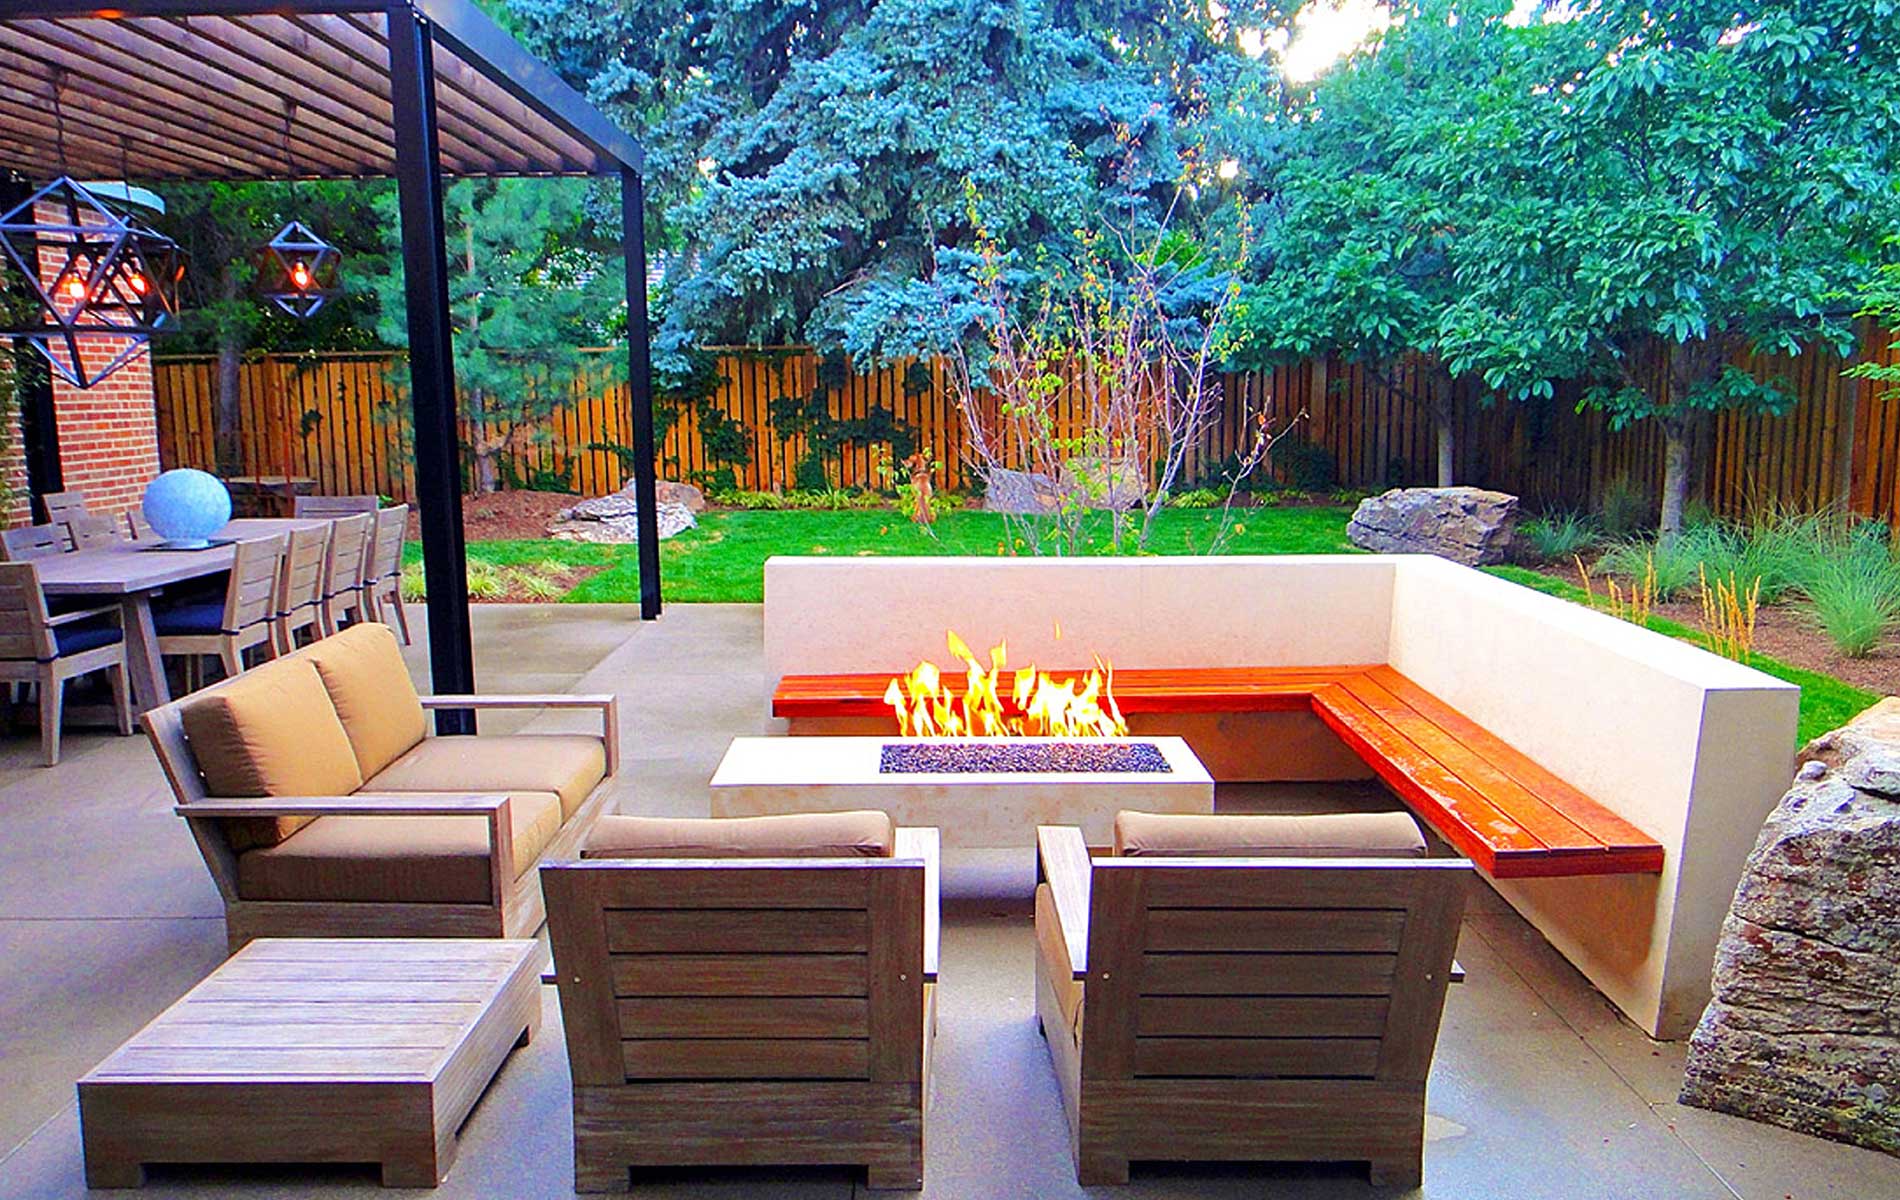 What to Include in an Outdoor Living Space